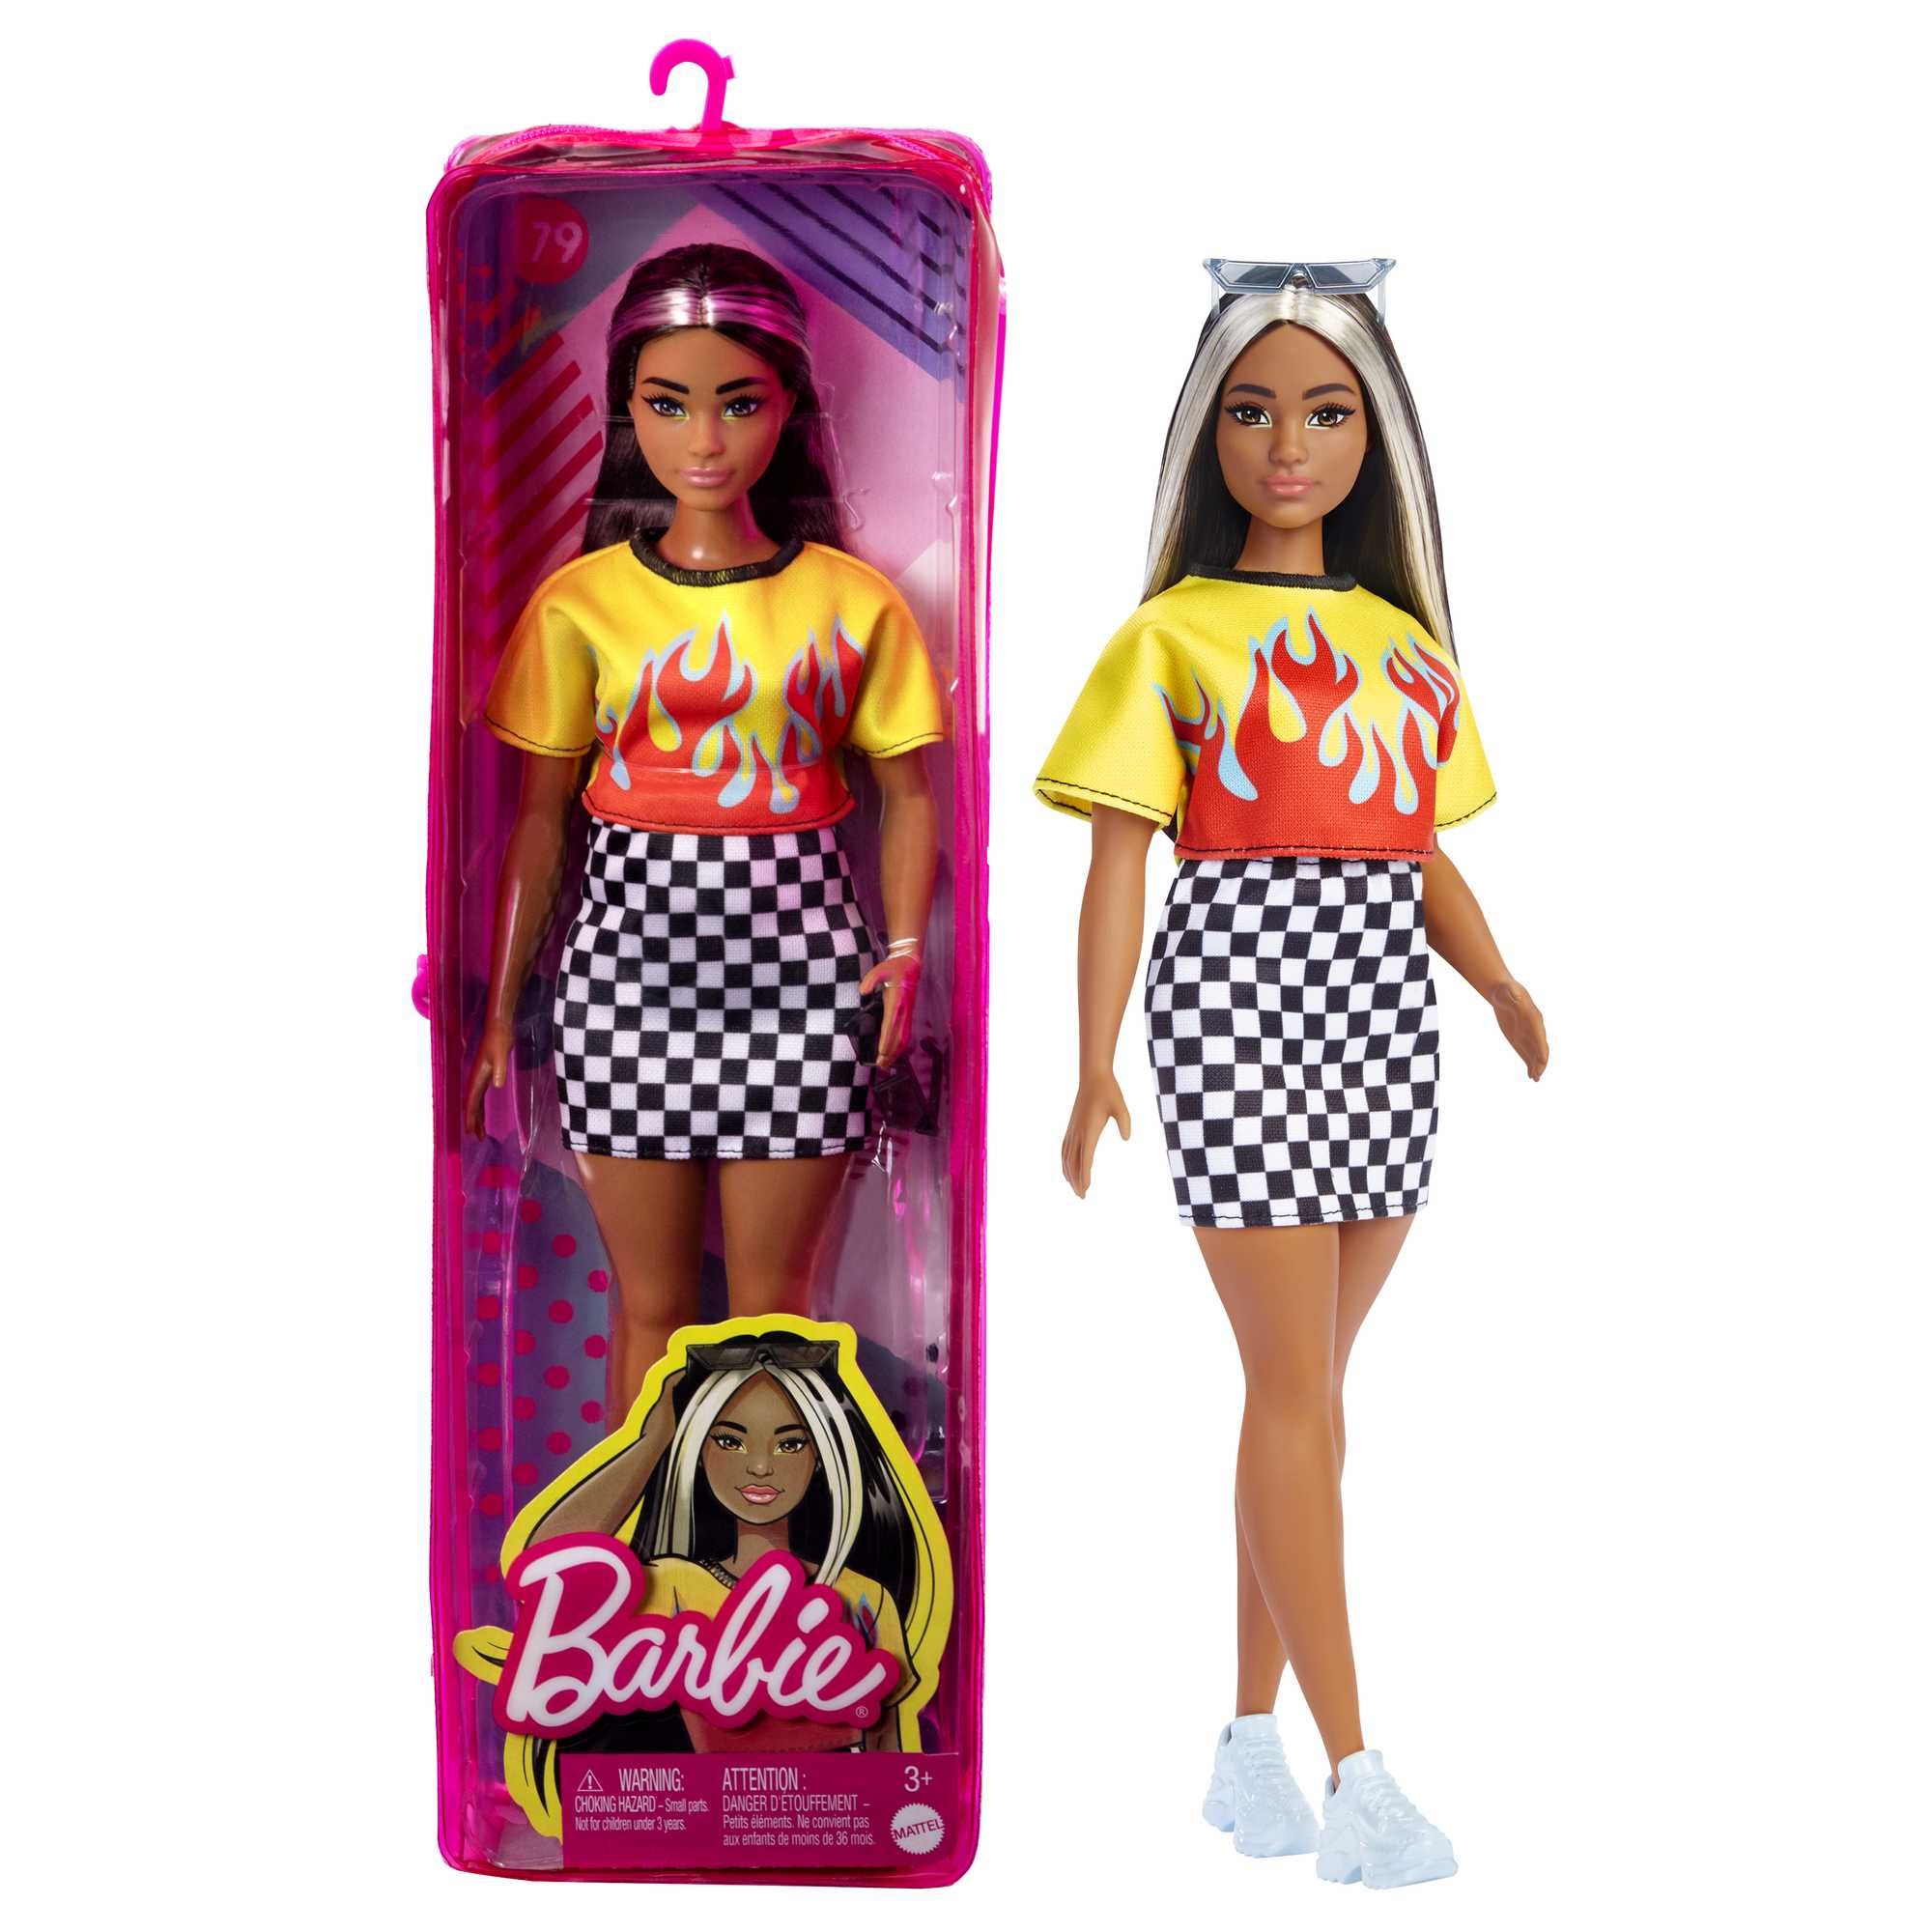 Barbie Doll Fashionista #179 - Brunette/Silver Yellow Top - Check